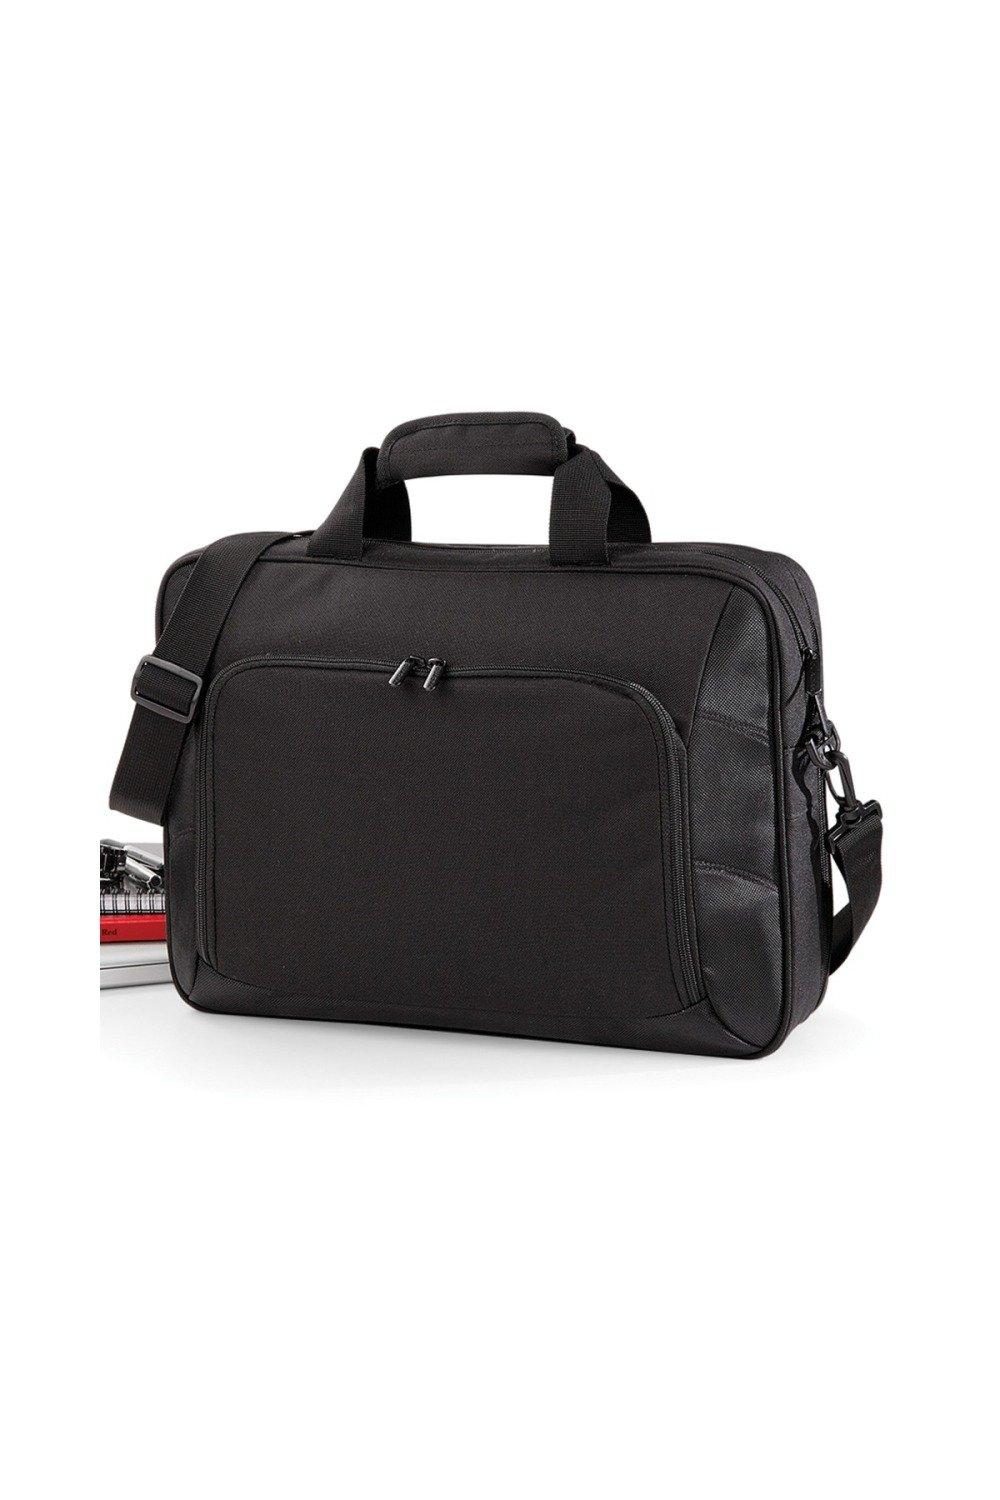 Executive Digital Office Bag (17inch Laptop Compatible) (Pack of 2)